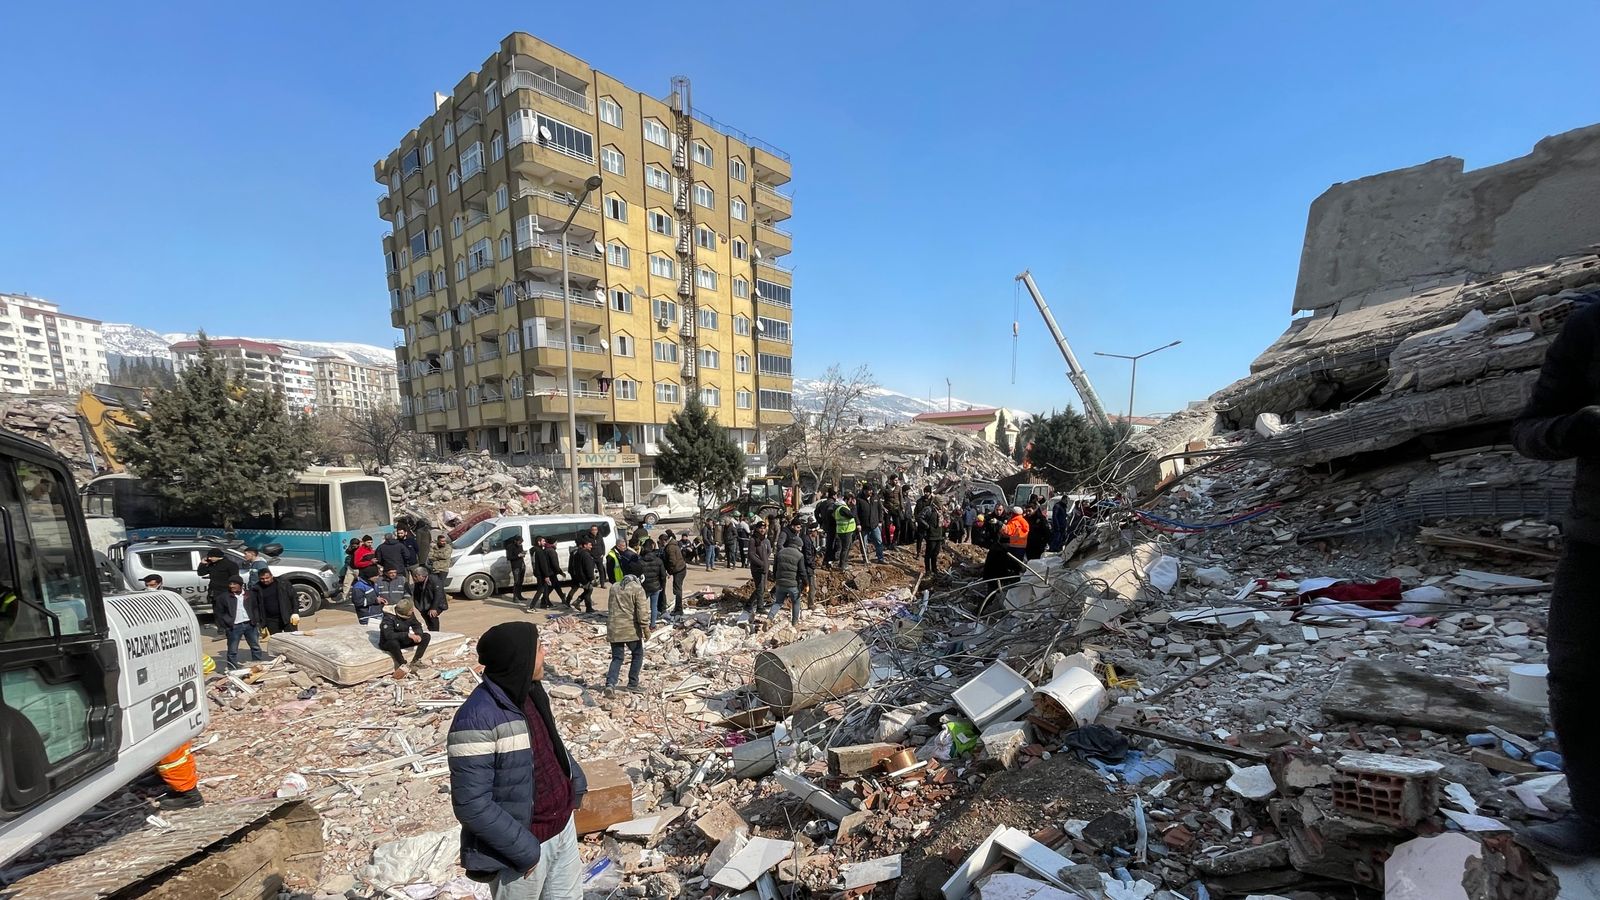 Turkey-Syria earthquake death toll expected to more than double, says UN aid chief